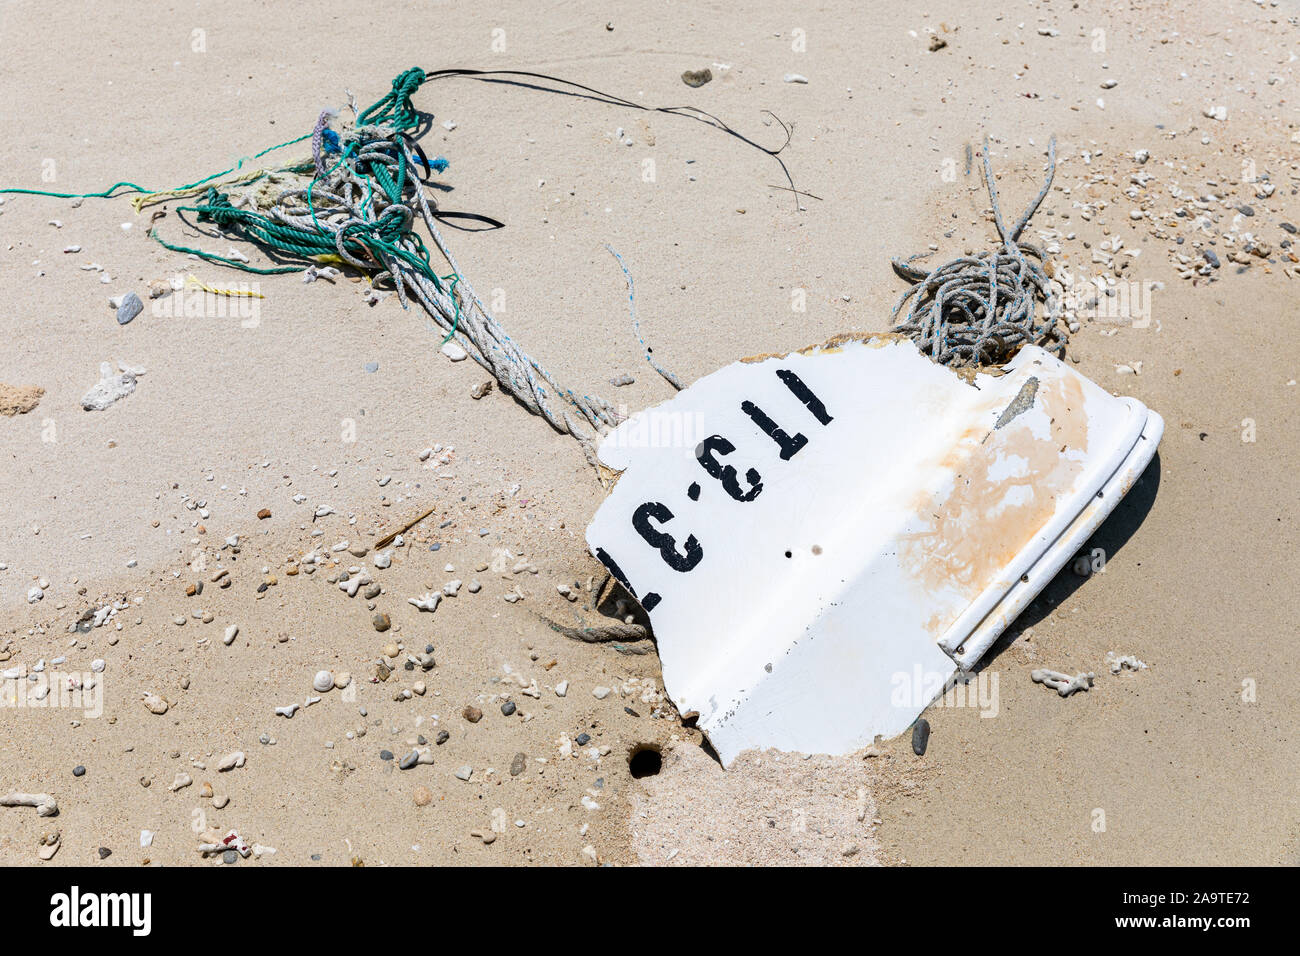 Flotsam, rope and piece of a boat, on a sand beach Stock Photo